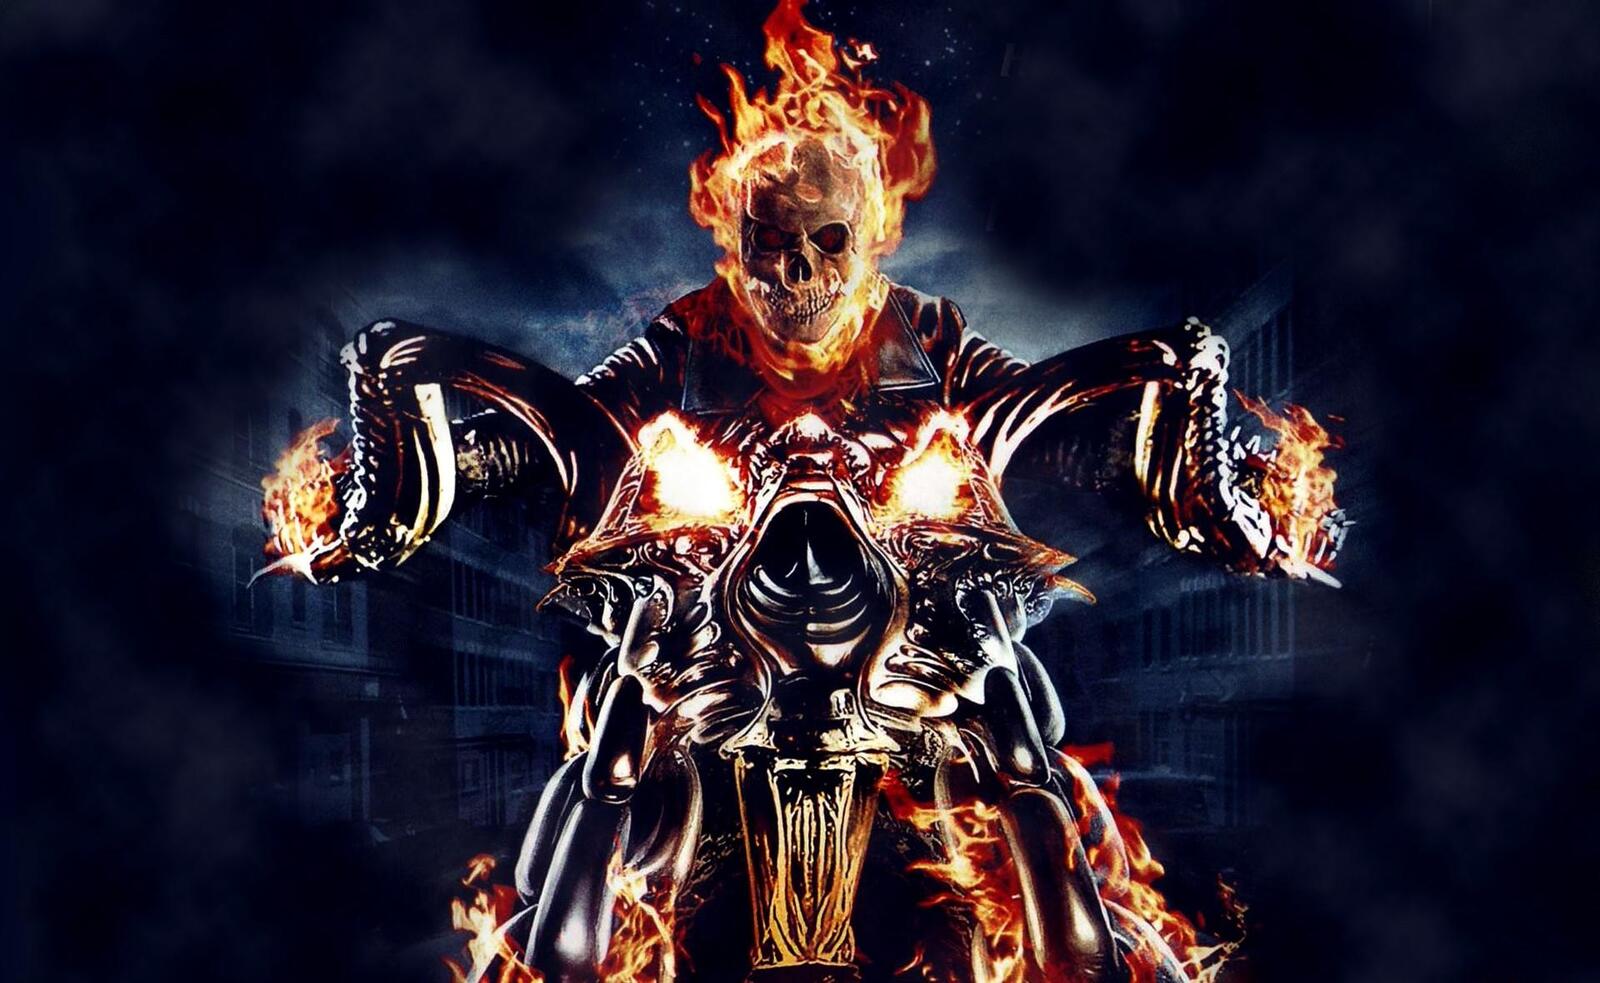 Wallpapers ghost rider motorcycle fire on the desktop